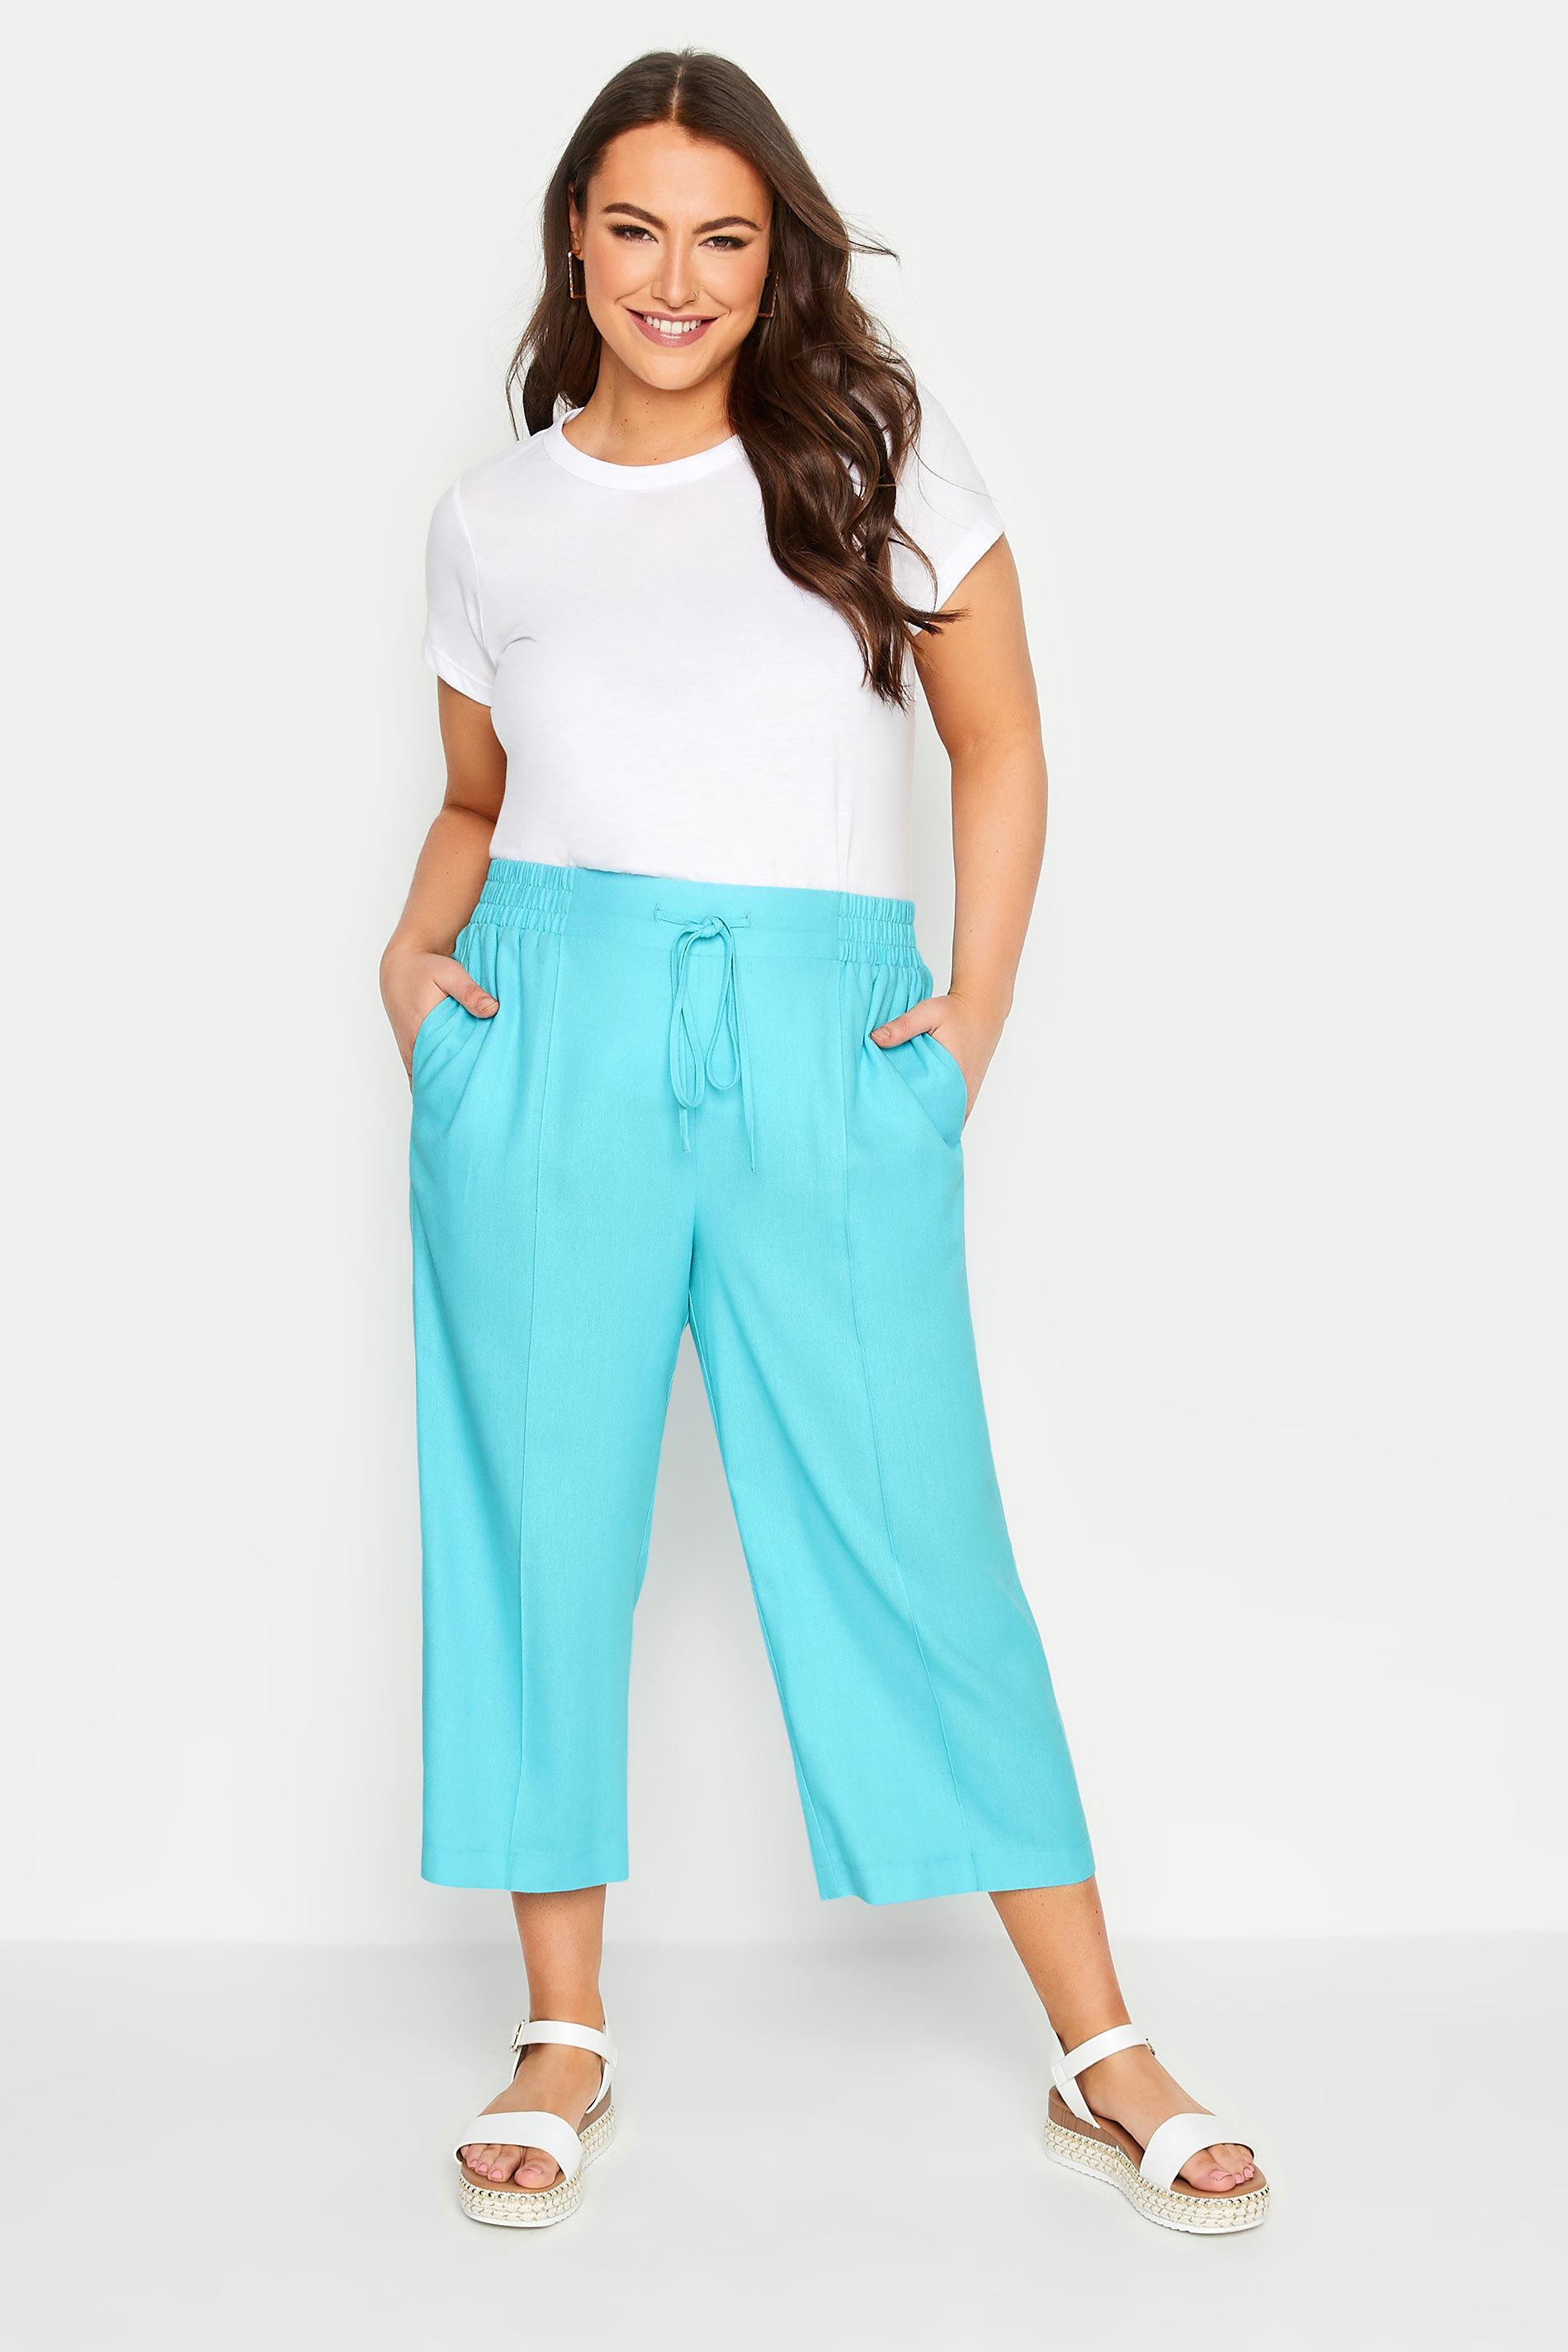 YOURS Plus Size Aqua Blue Linen Look Culottes | Yours Clothing